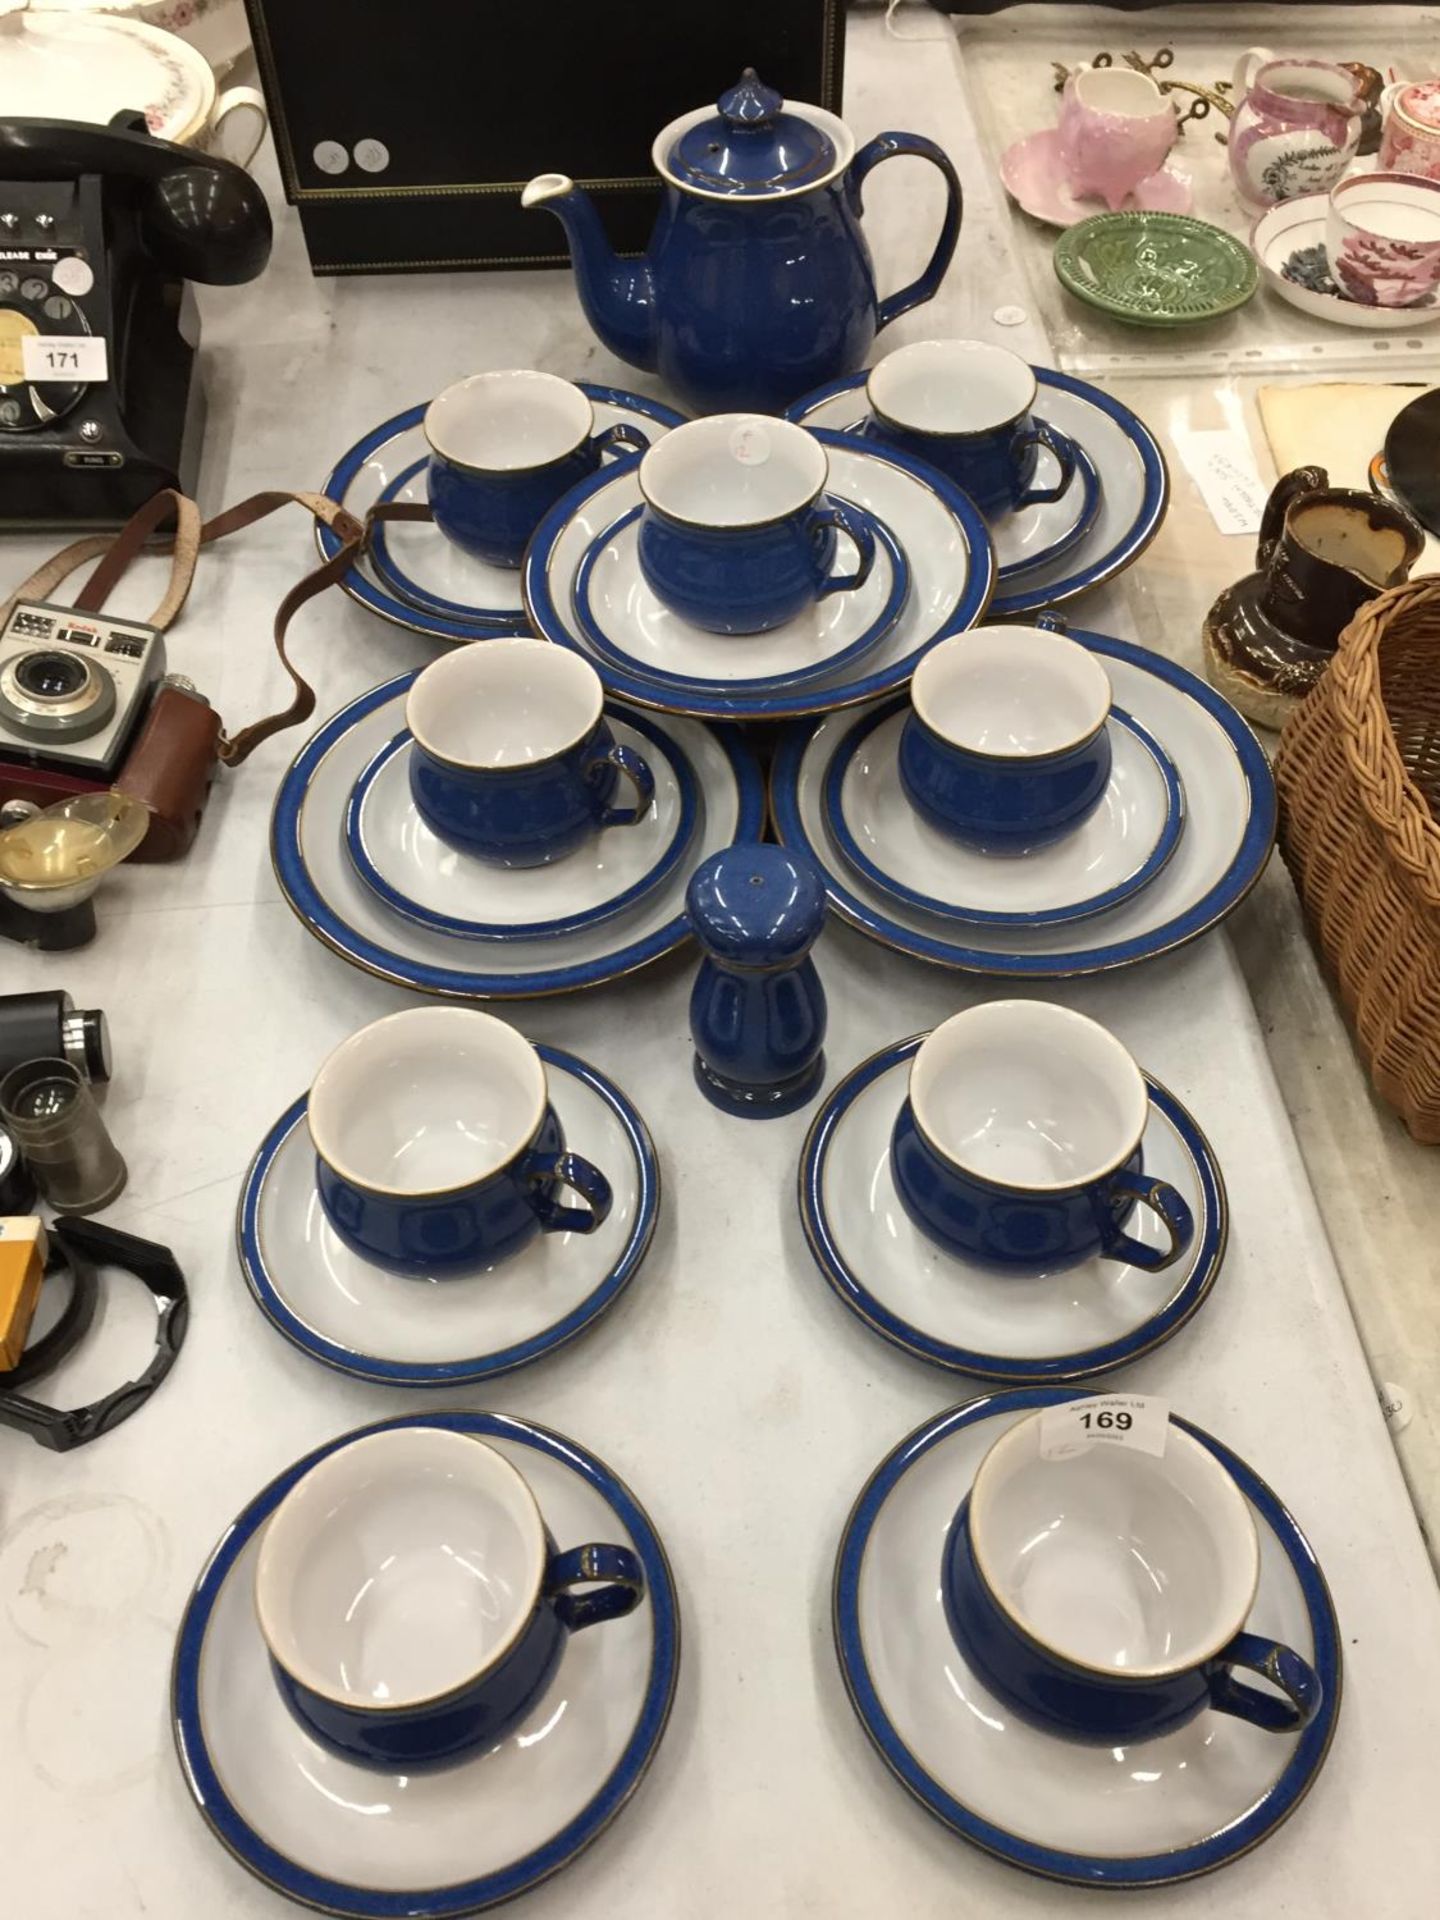 A BLUE DENBY TEASET TO INCLUDE A TEAPOT, BOWLS, CUPS, SAUCERS, ETC - 25 PIECES IN TOTAL